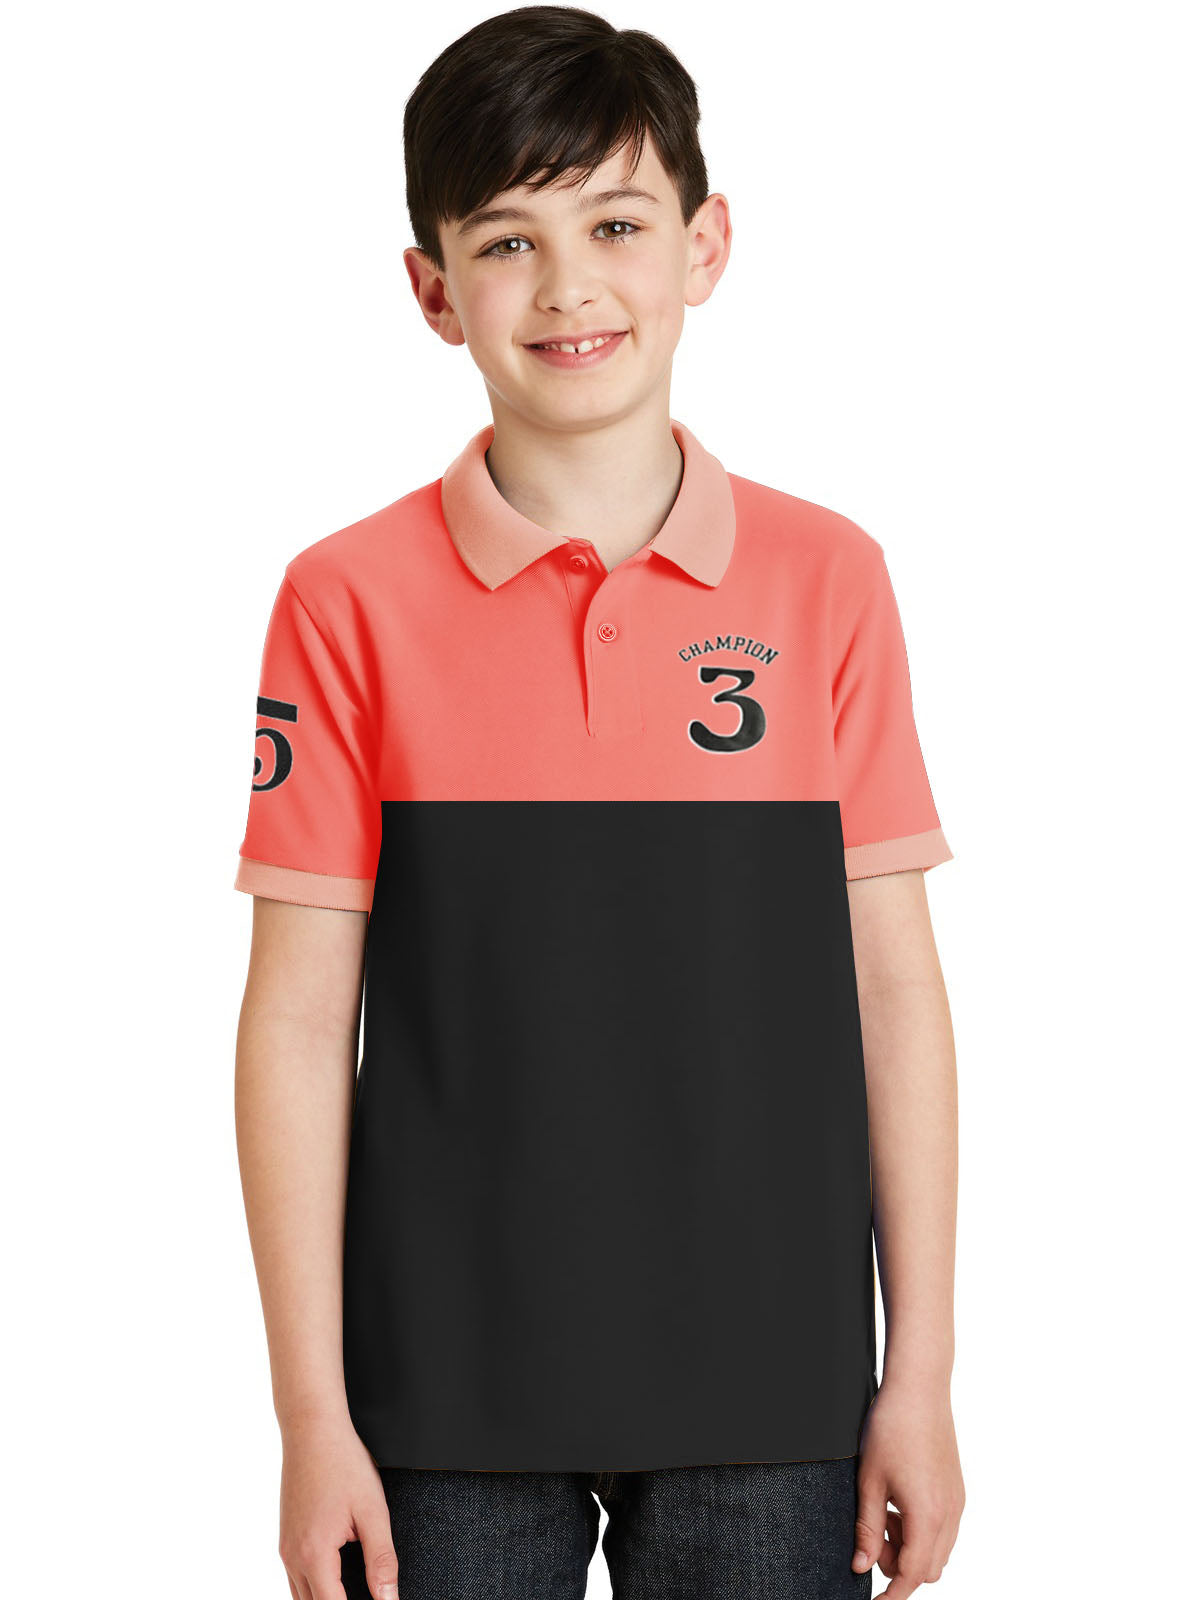 Champion Single Jersey Polo Shirt For Kids-Coral Pink & Black Panels-SP1685/RT2406